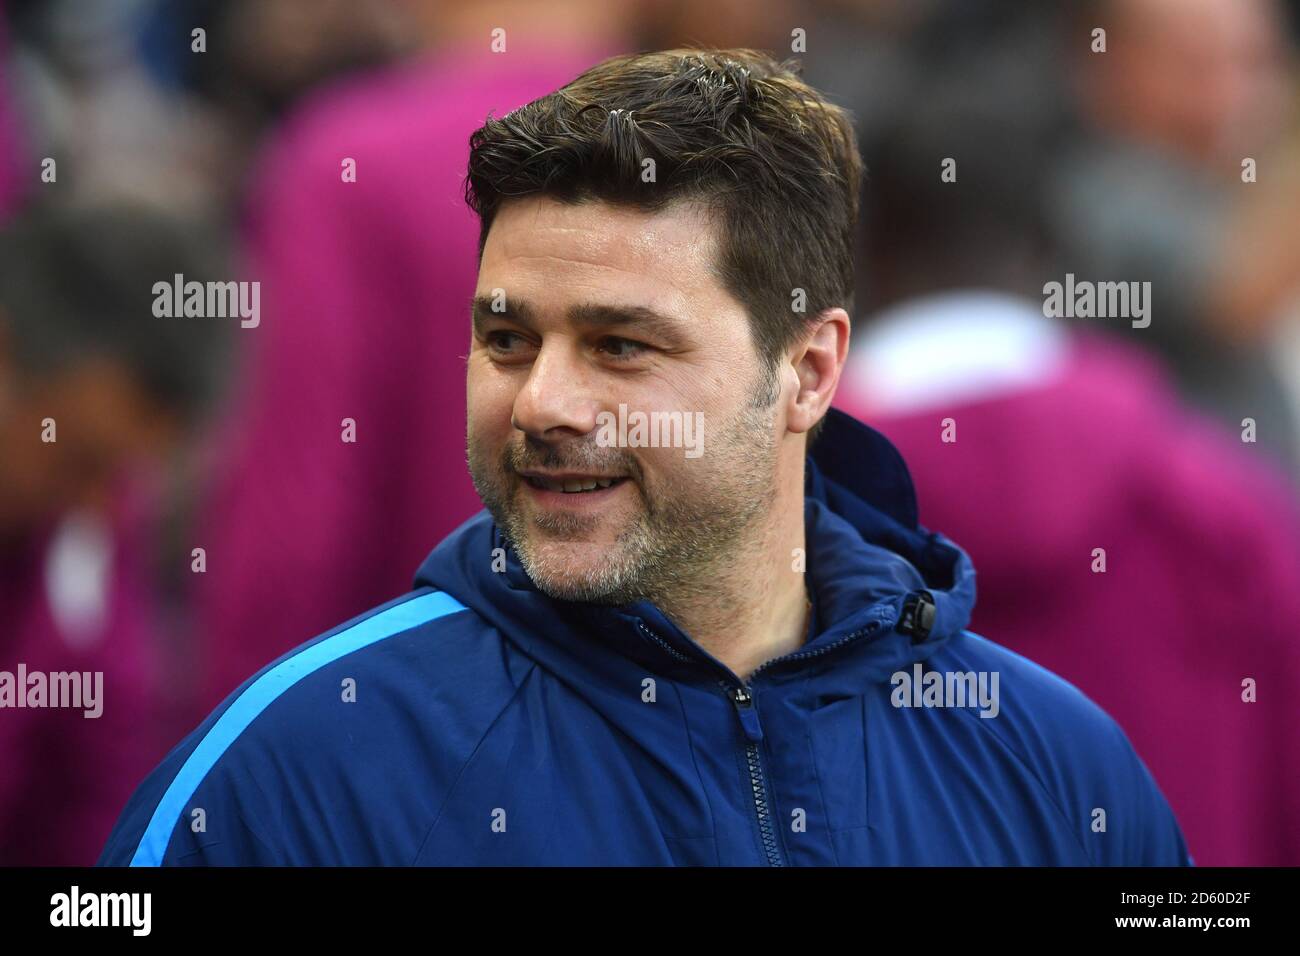 Tottenham Hotspur manager Mauricio Pochettino ahead of the Premier League match at Wembley Stadium, London. PRESS ASSOCIATION Photo. Picture date: Saturday April 14, 2018. See PA story SOCCER Tottenham. Photo credit should read: Dominic Lipinski/PA Wire. RESTRICTIONS: EDITORIAL USE ONLY No use with unauthorised audio, video, data, fixture lists, club/league logos or 'live' services. Online in-match use limited to 75 images, no video emulation. No use in betting, games or single club/league/player publications. Stock Photo